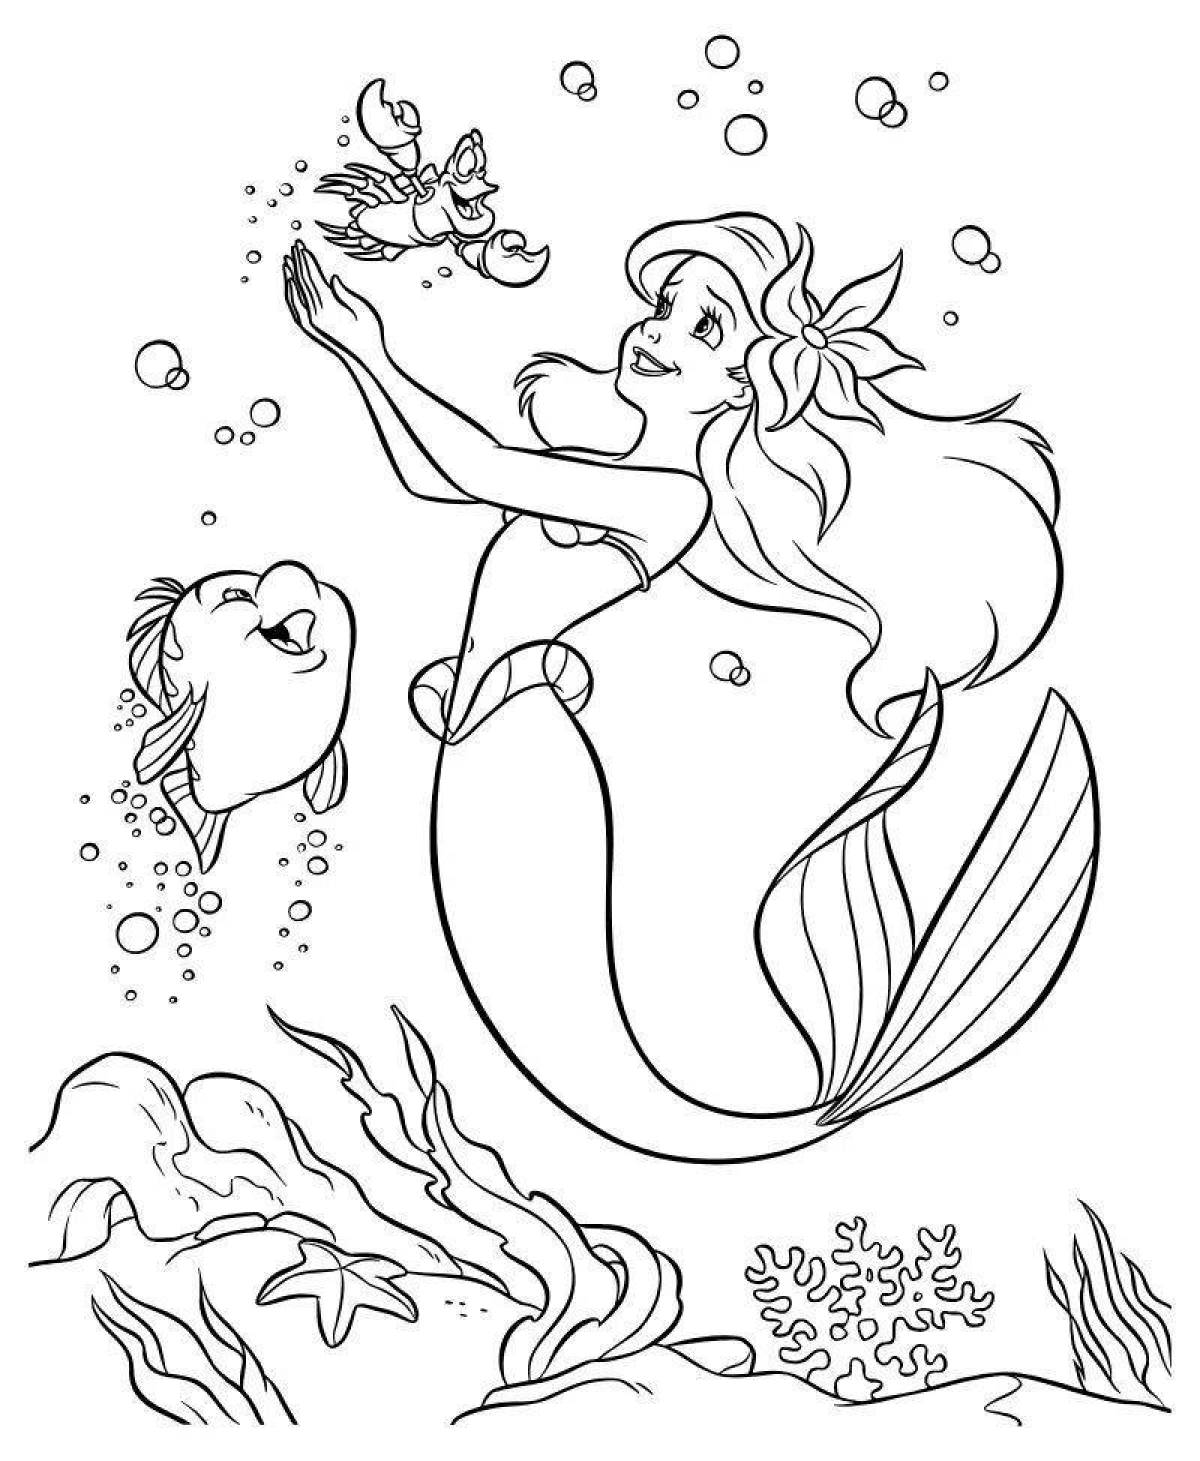 Little mermaid coloring book for girls